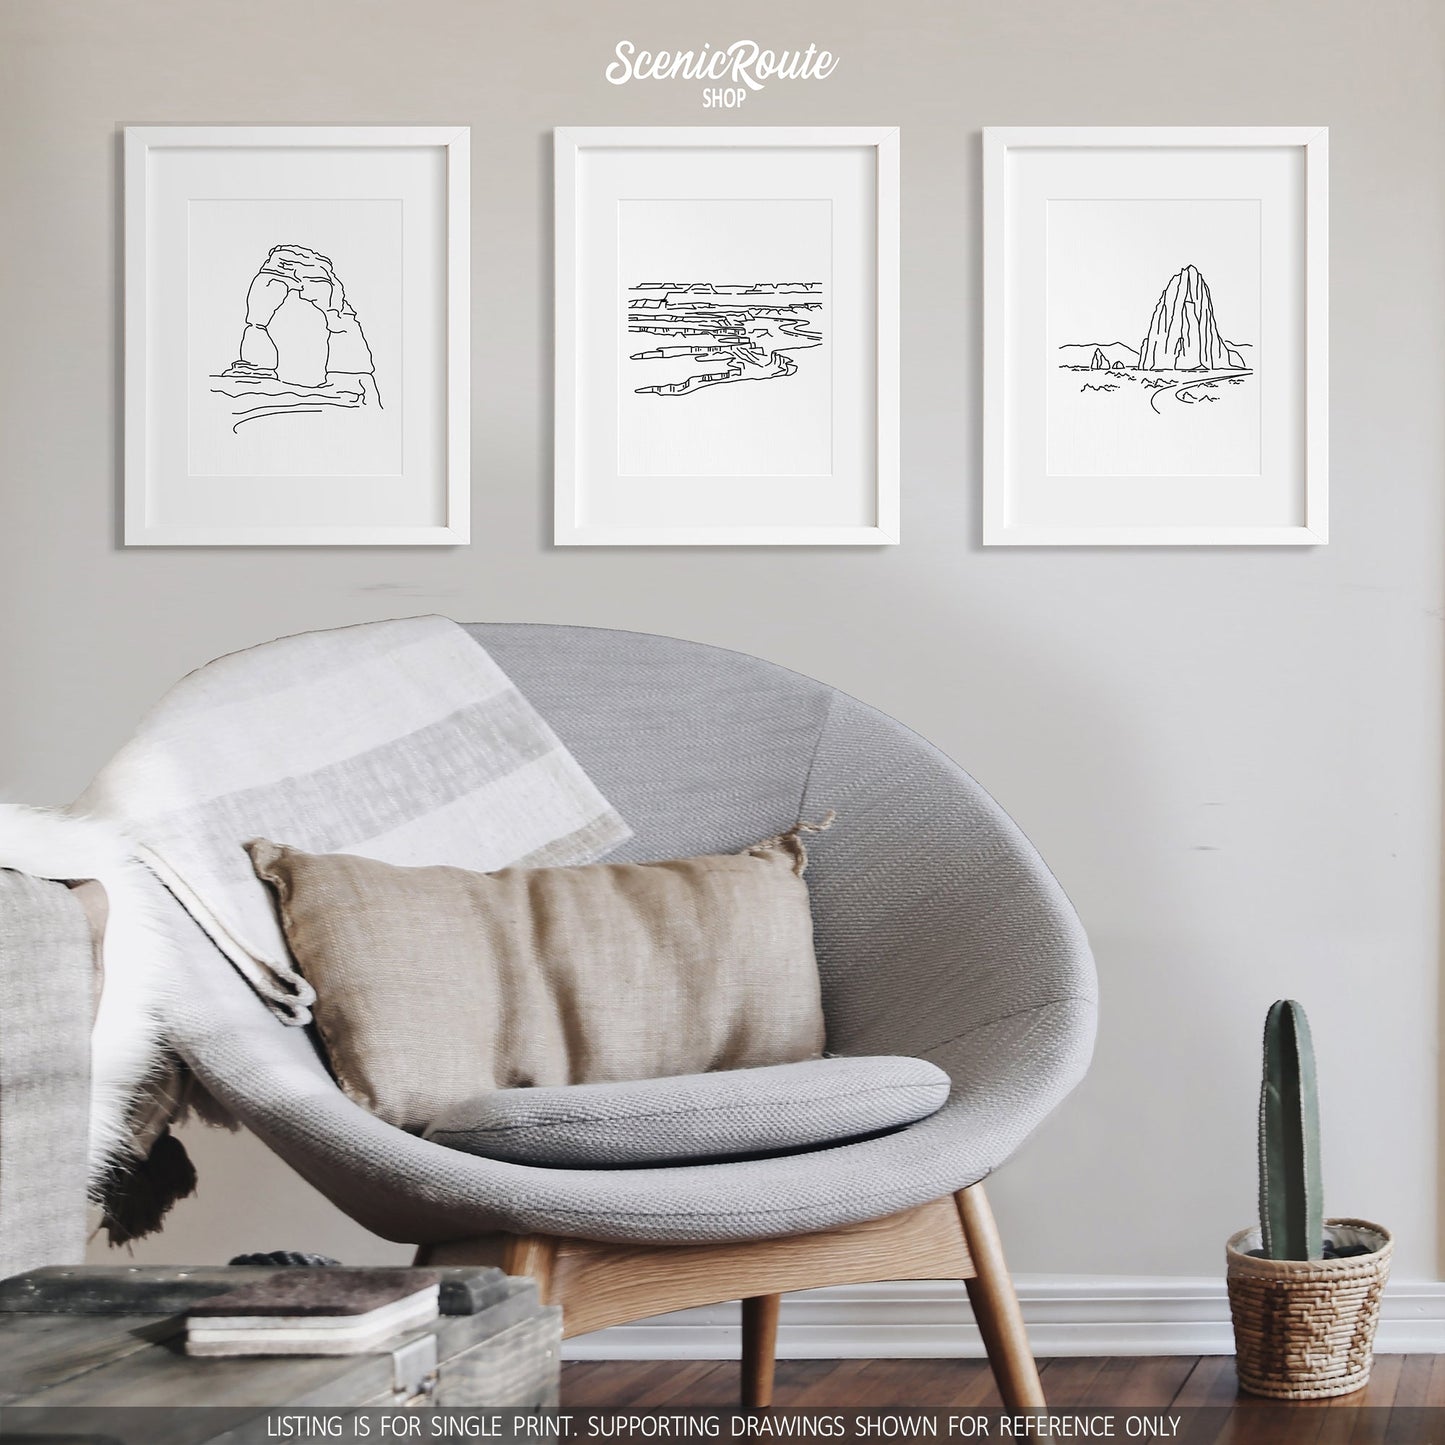 A group of three framed drawings on a white wall above a round chair. The line art drawings include Arches National Park, Canyonlands National Park, and Capitol Reef National Park